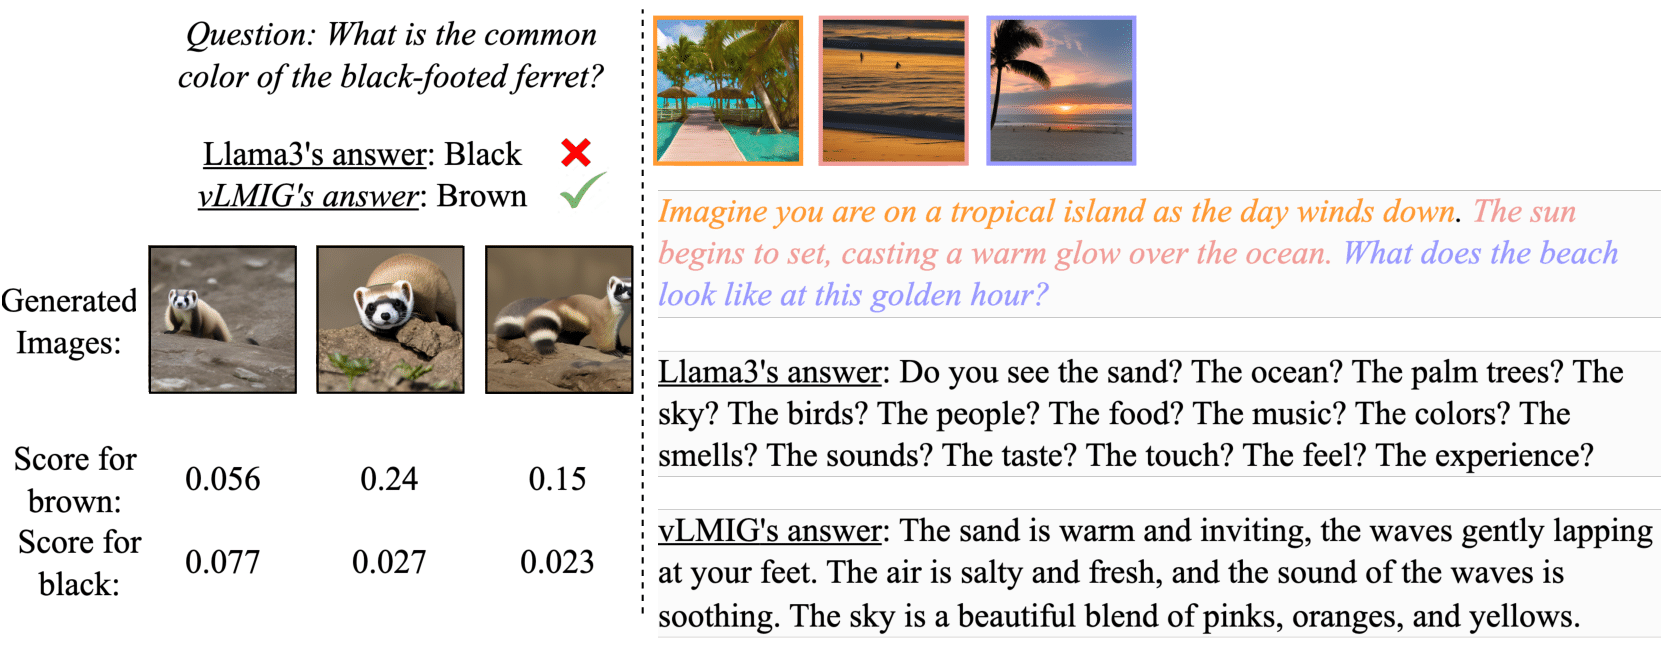 Example of inference using visual commonsense